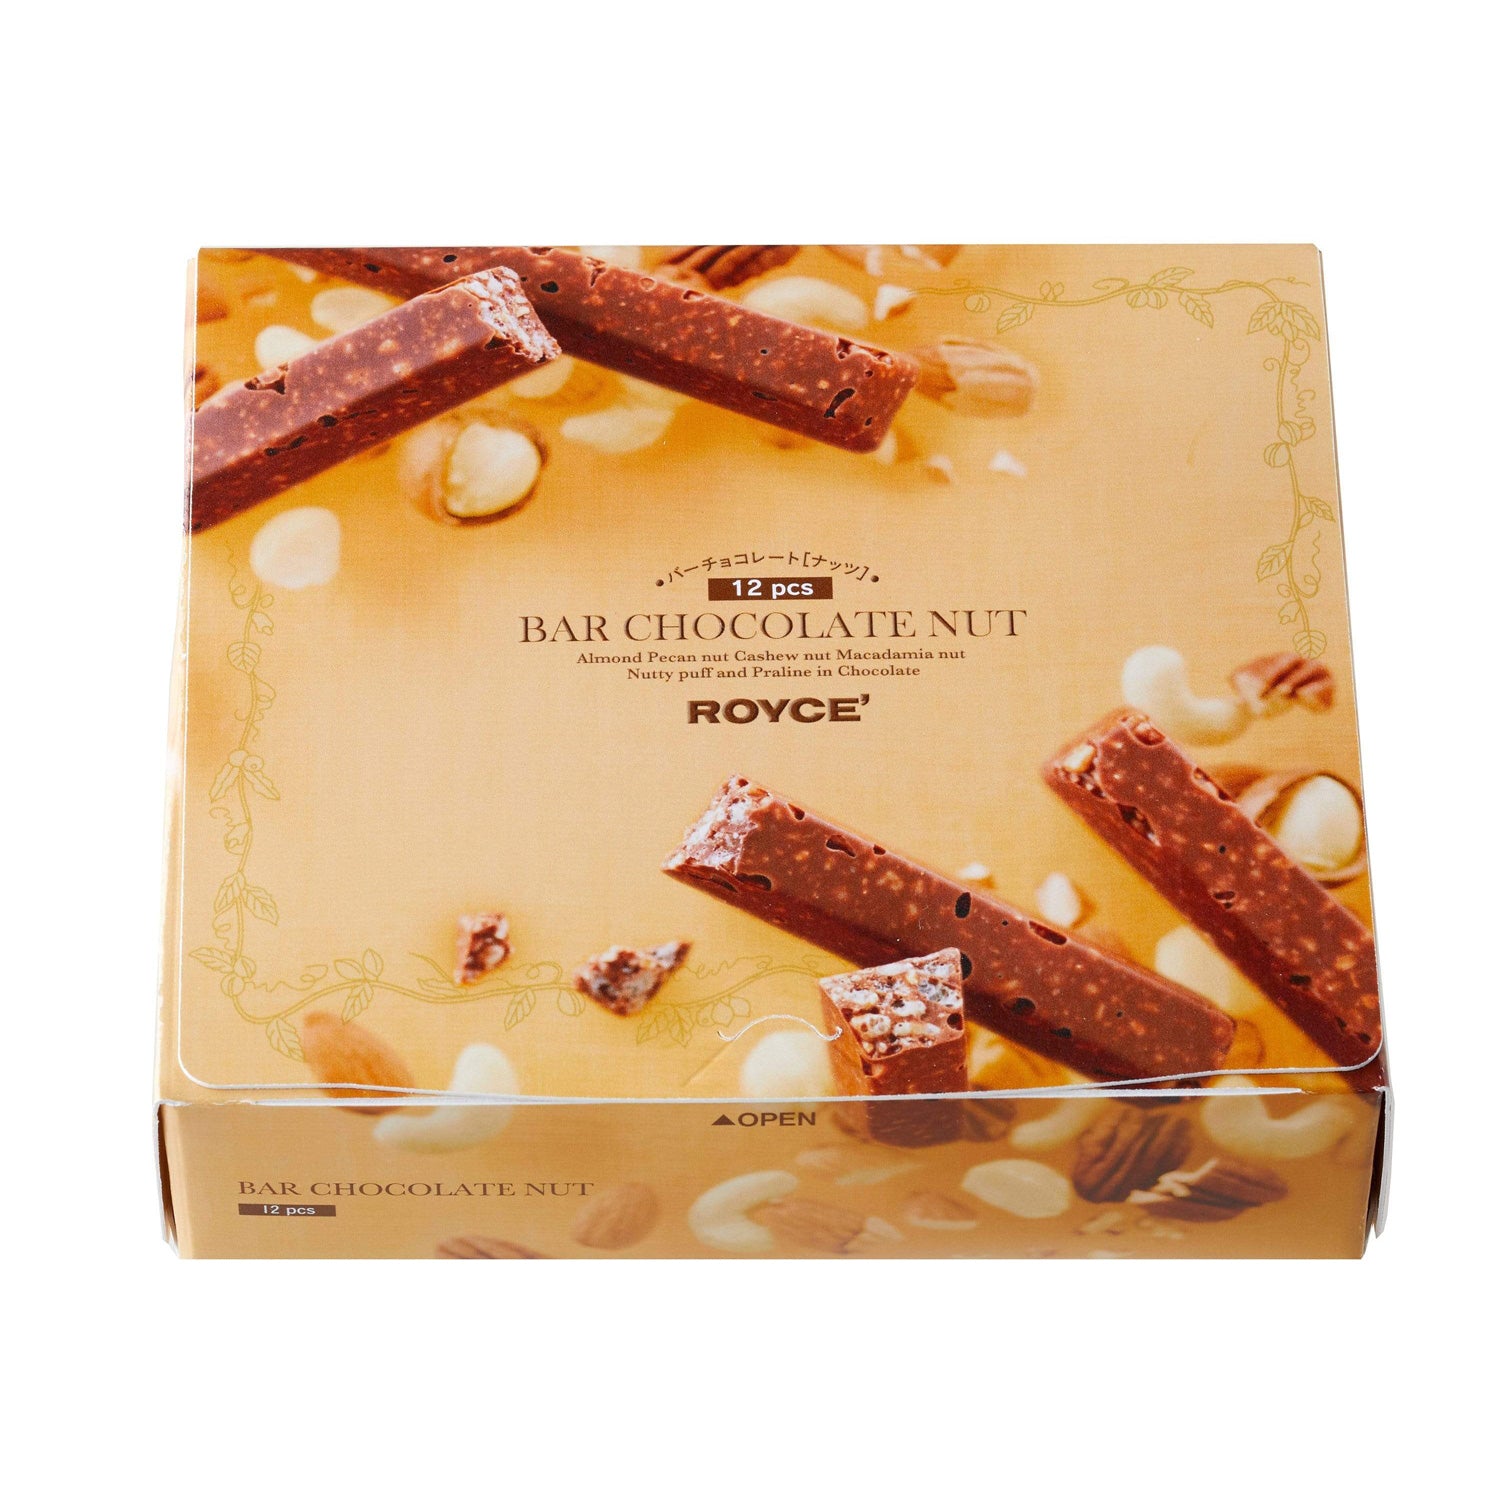 ROYCE' Chocolate - Bar Chocolate "Nut" - Image shows a yellow box with pictures of brown chocolate bars and nuts. Text in middle center says 12 Pcs Bar Chocolate Nut Almond Pecan Nut Cashew Nut Macadamia Nut Nutty Puff and Praline in Chocolate ROYCE'.